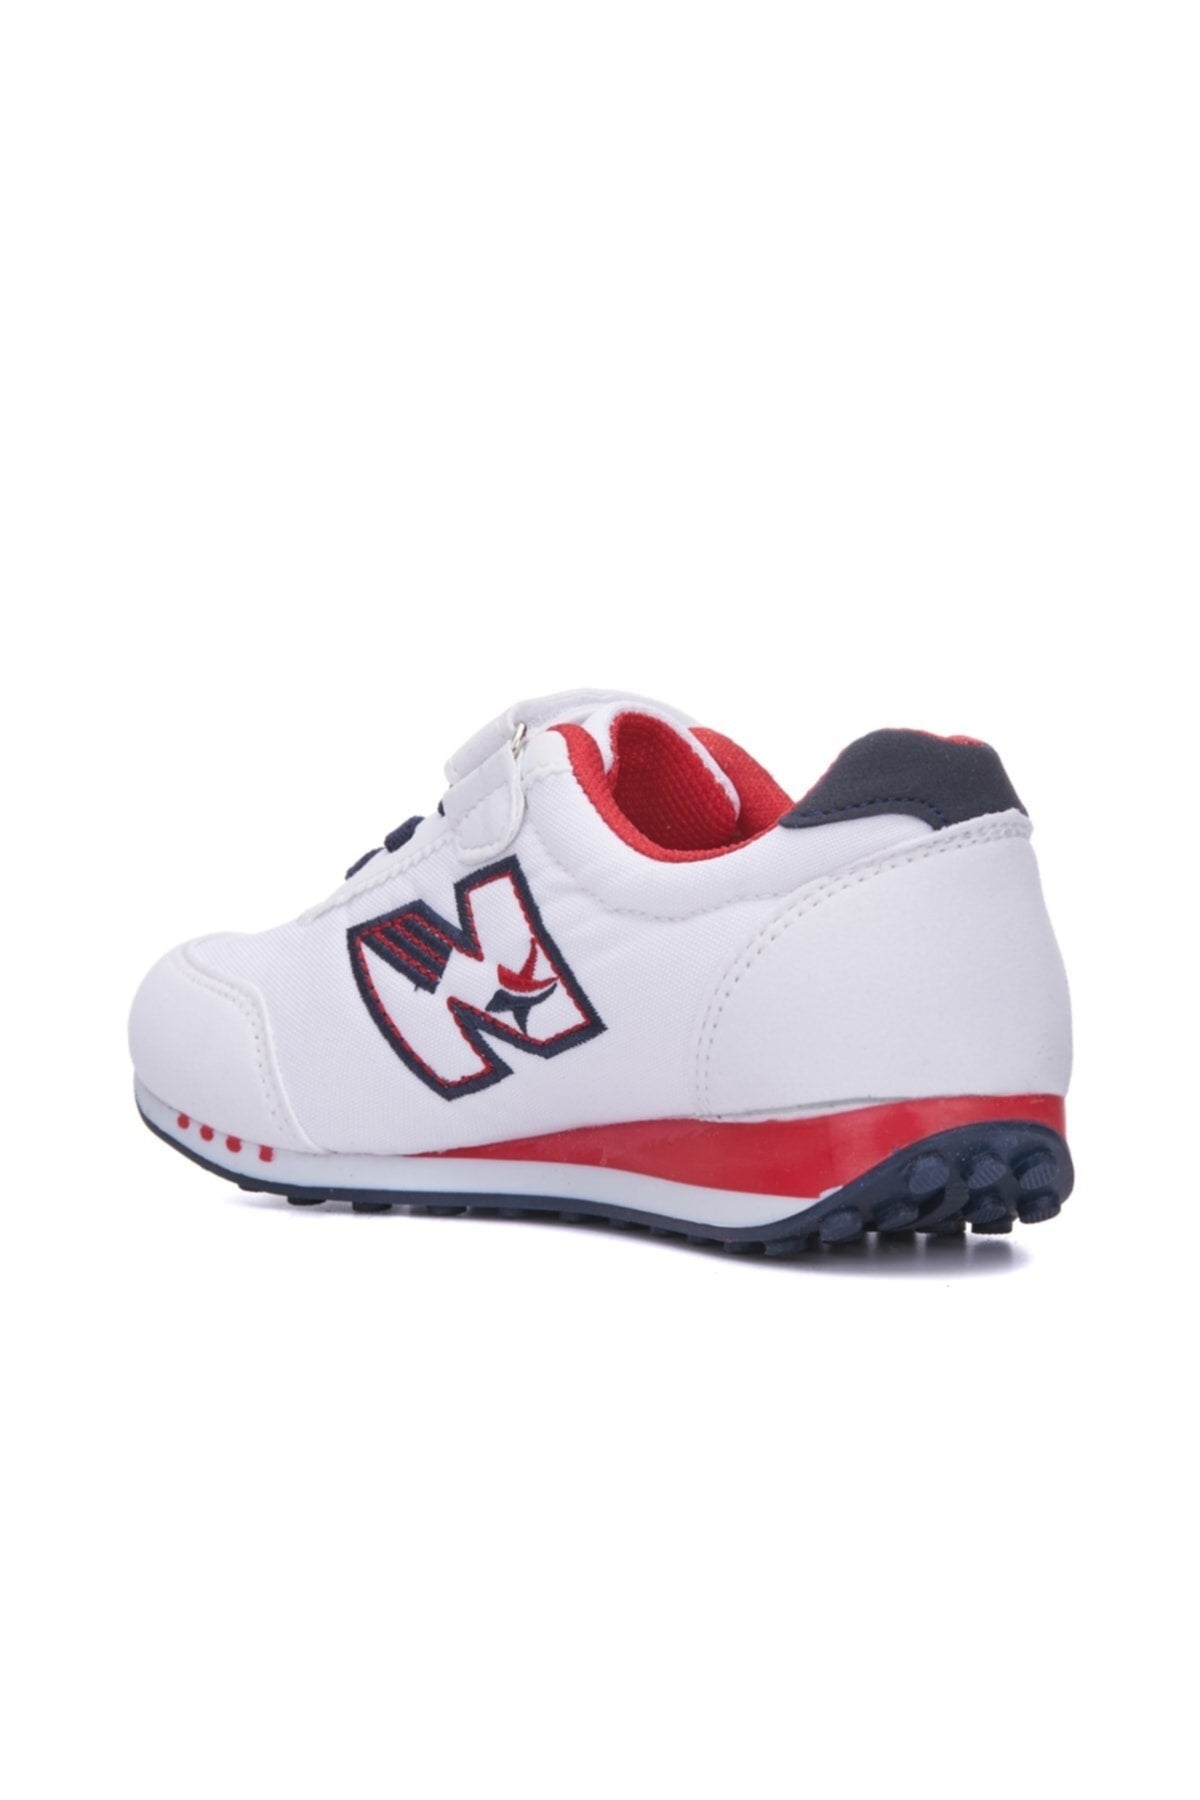 Children's Sport Shoes Call and Laced Daily Casual Sneaker